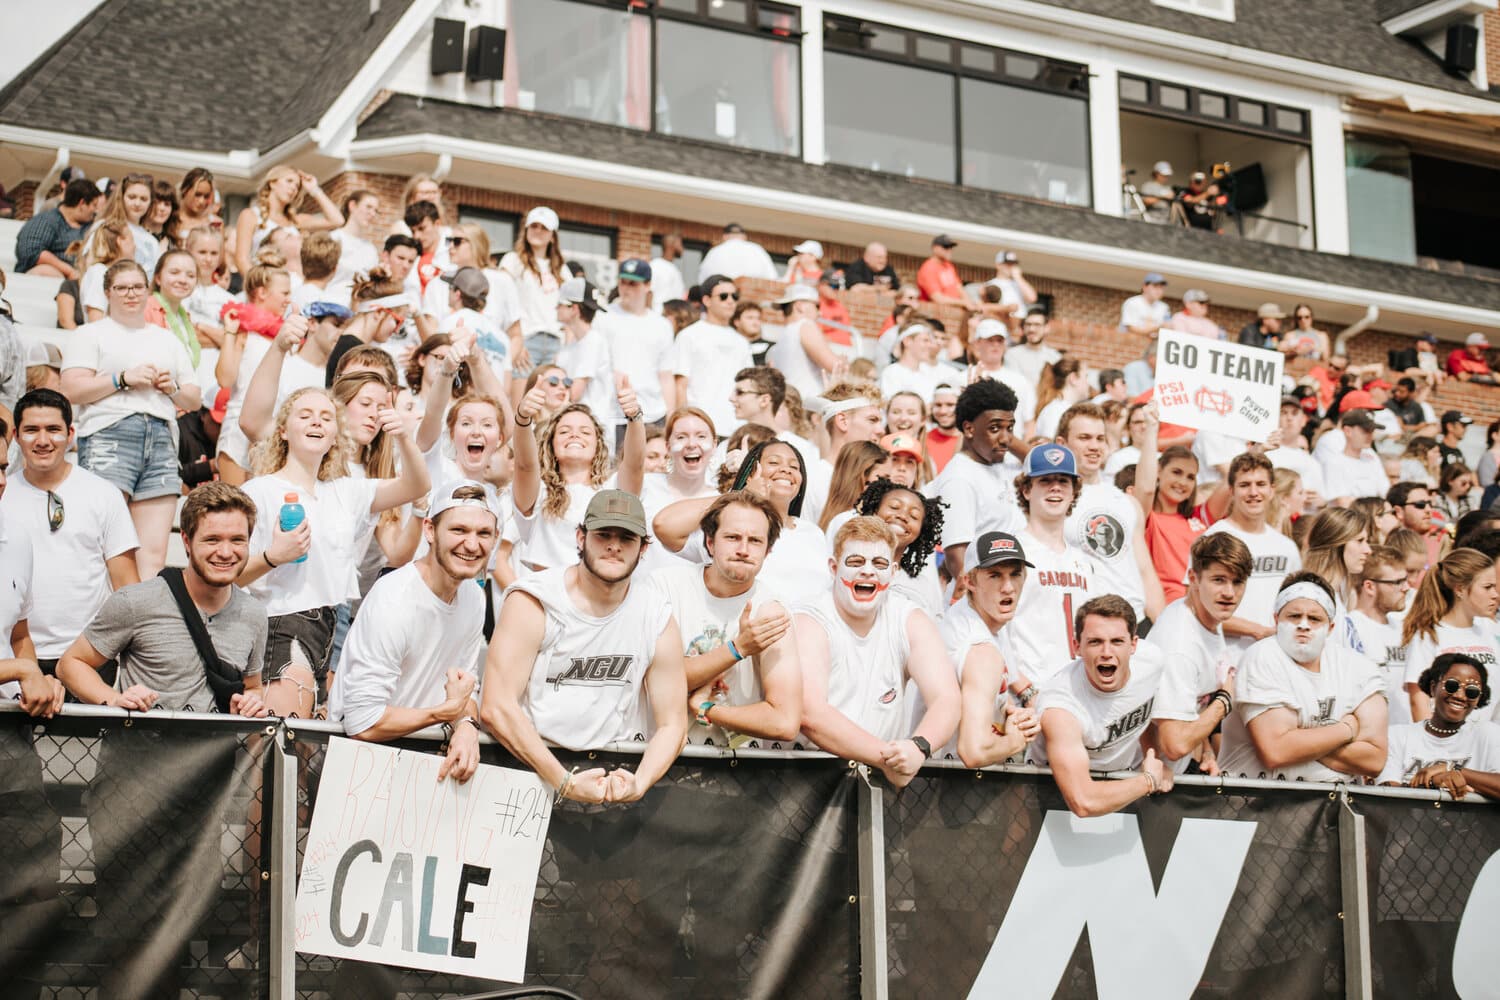 The student section at North Greenville this past Saturday also got to cheer on our football team, and their energy was over the fence.